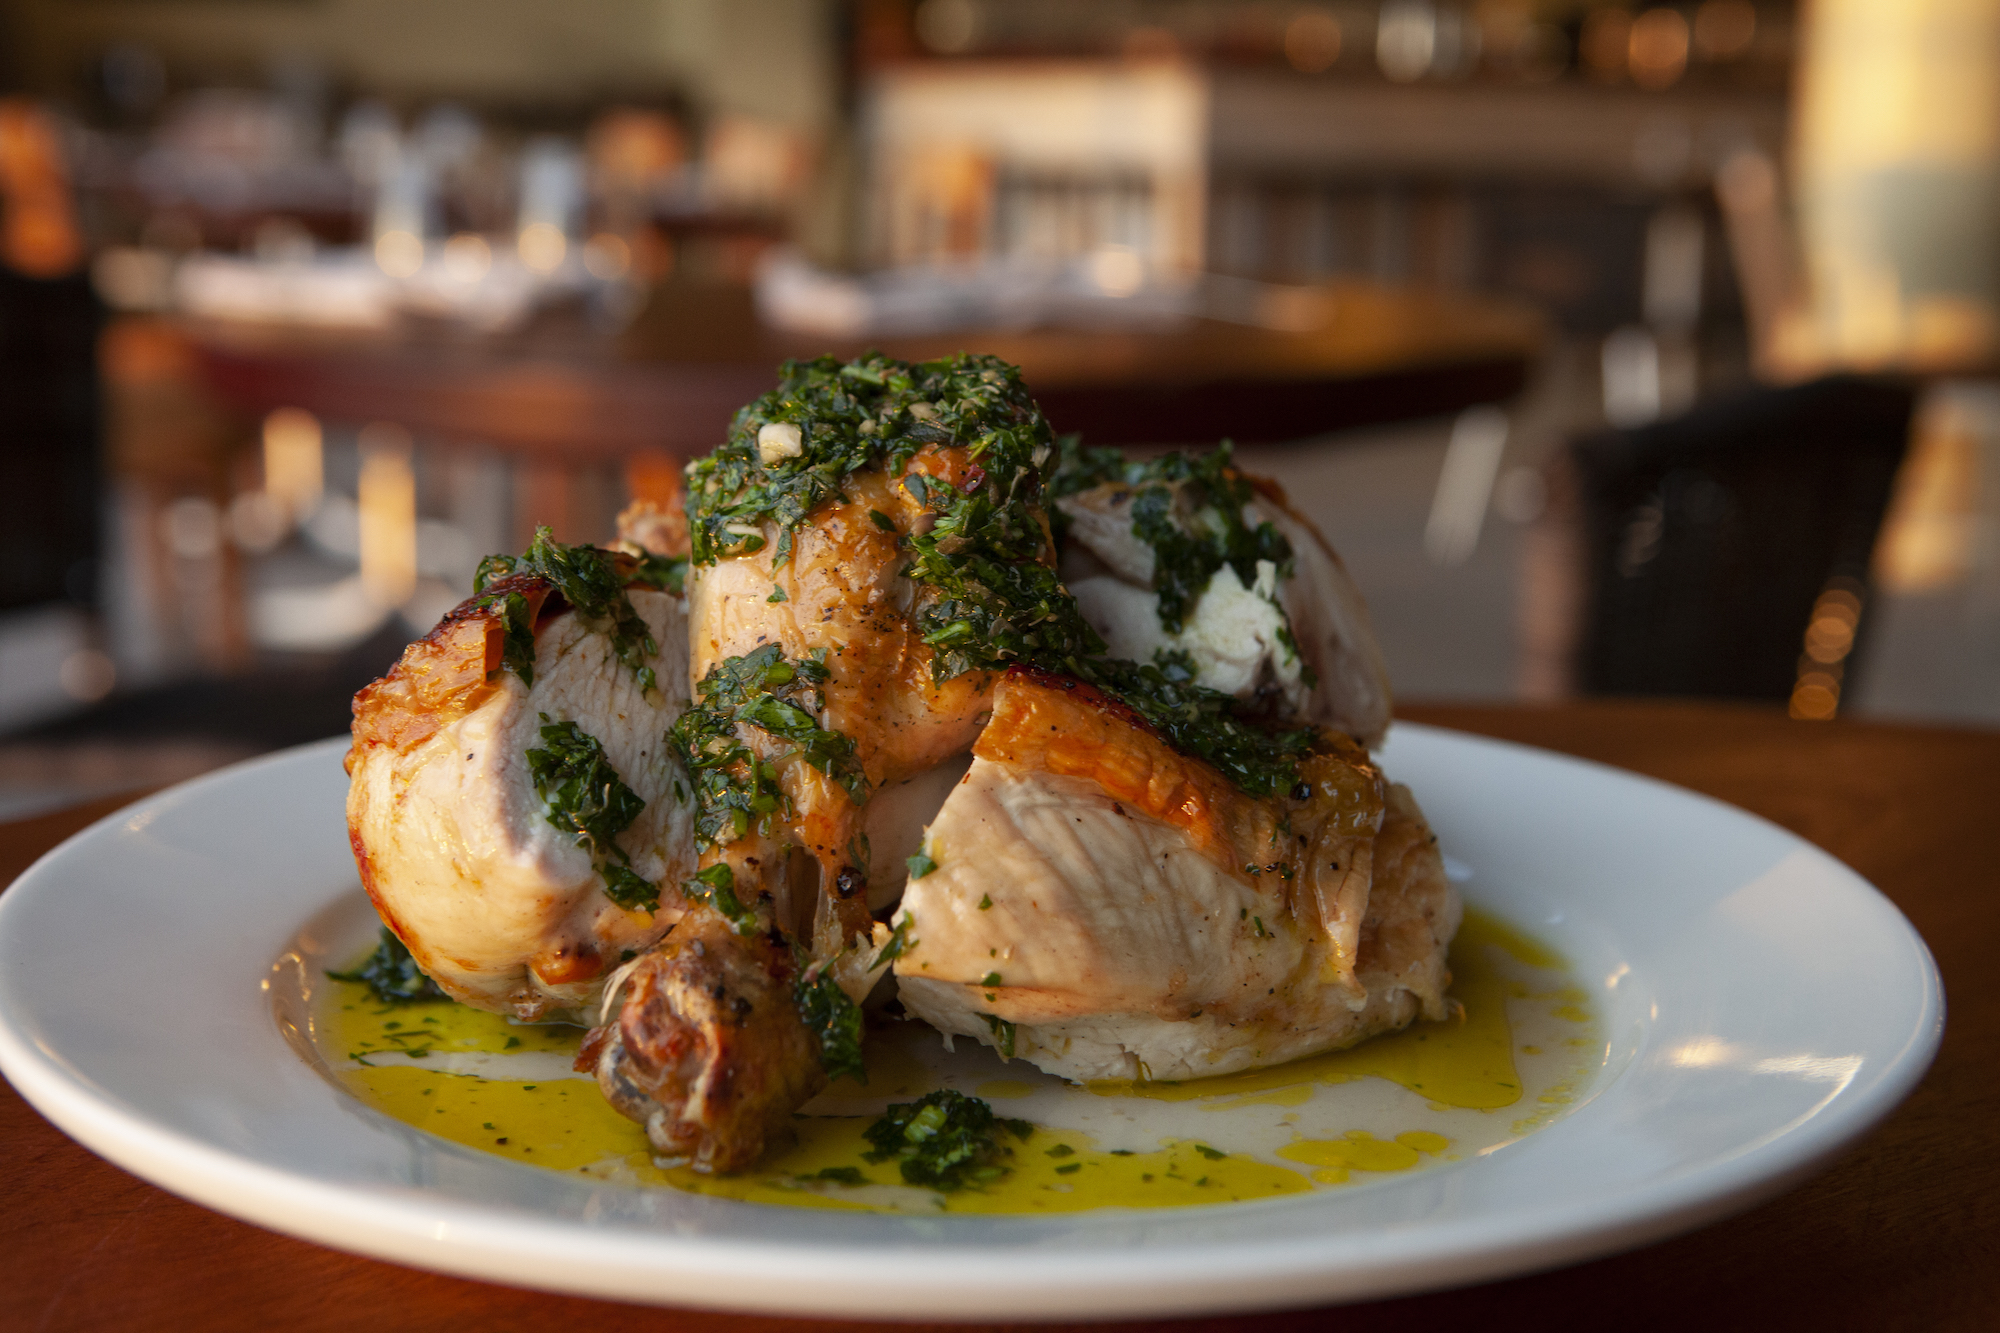 Barbuto's roast chicken. Food and interior photos by Jen Davidson, courtesy of Barbuto